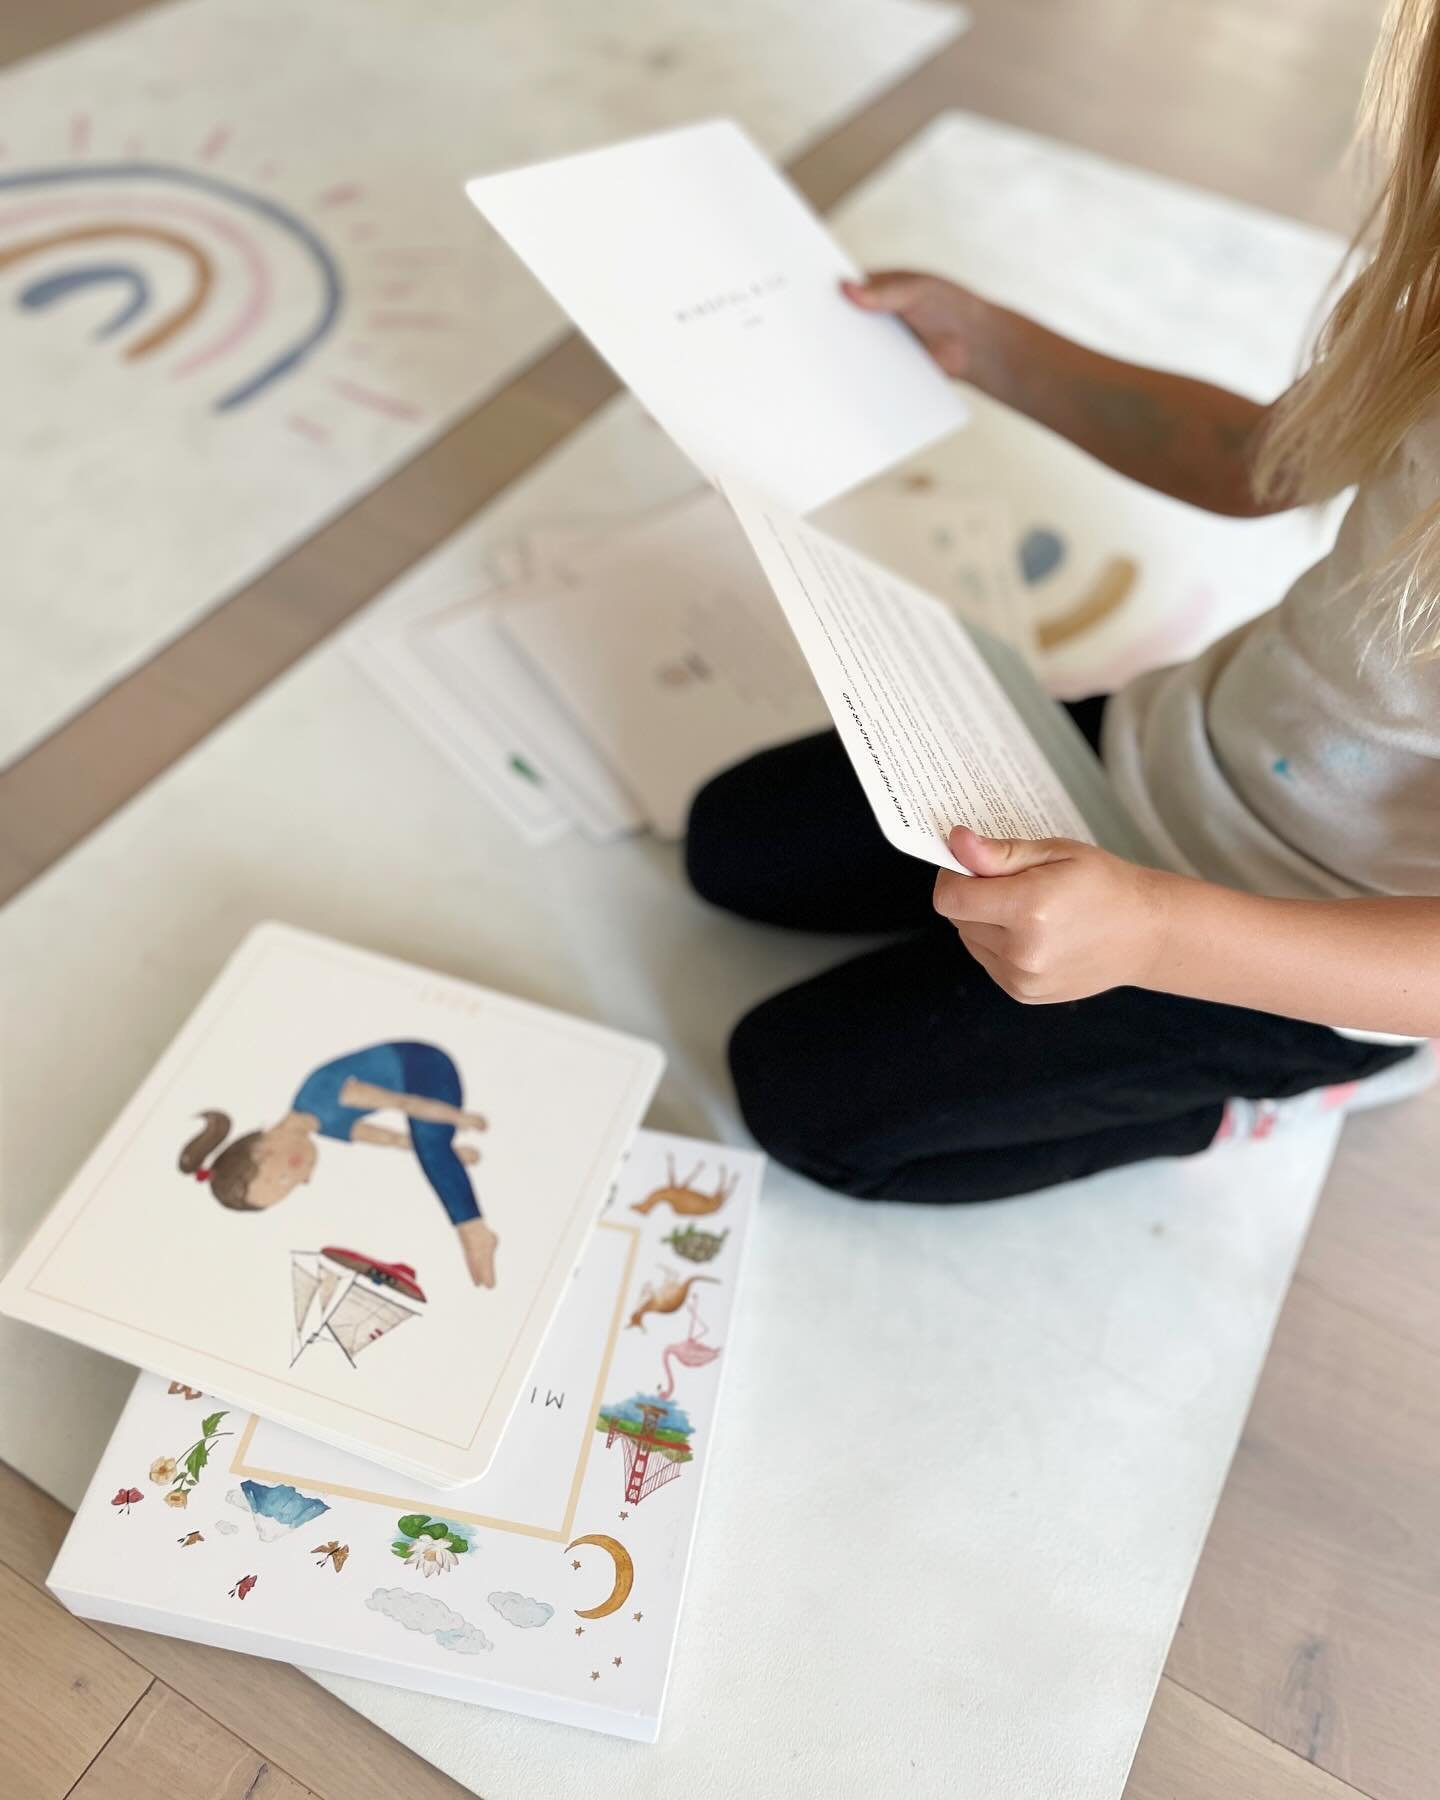 I LOVE how much this brand cares about the well being of our littles and how we can help inspire mindfulness through their thoughtful products. 
A sweet yoga deck by @mindfulandcokids to have fun with  your littles rolling out their yoga mat. Make su